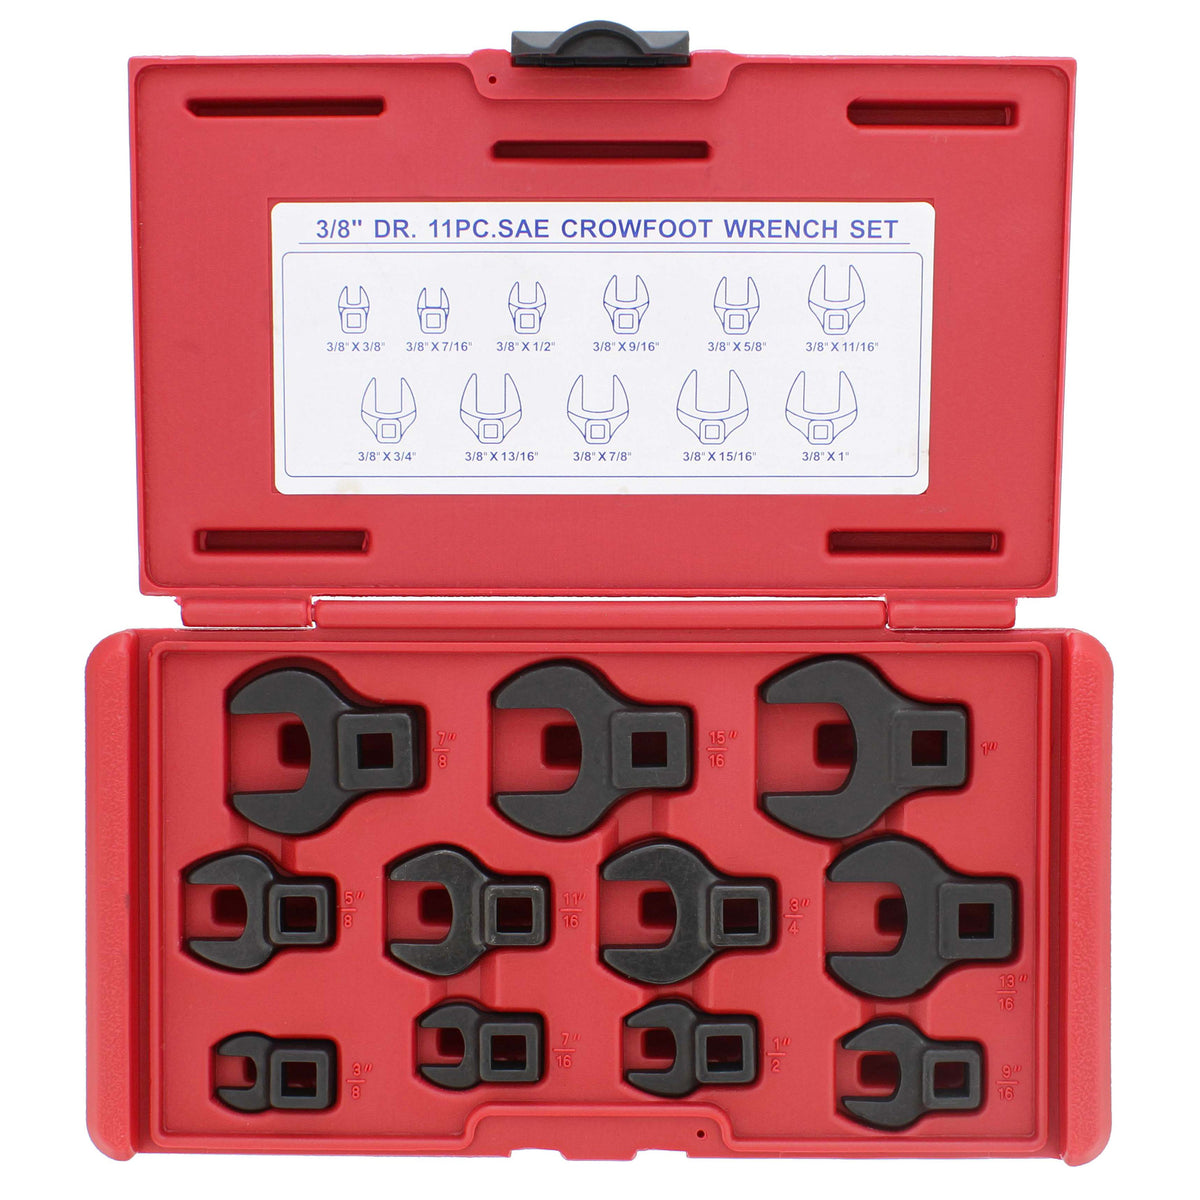 Crowfoot Wrench SAE Standard 3/8” Inch Drive 11-Piece Set